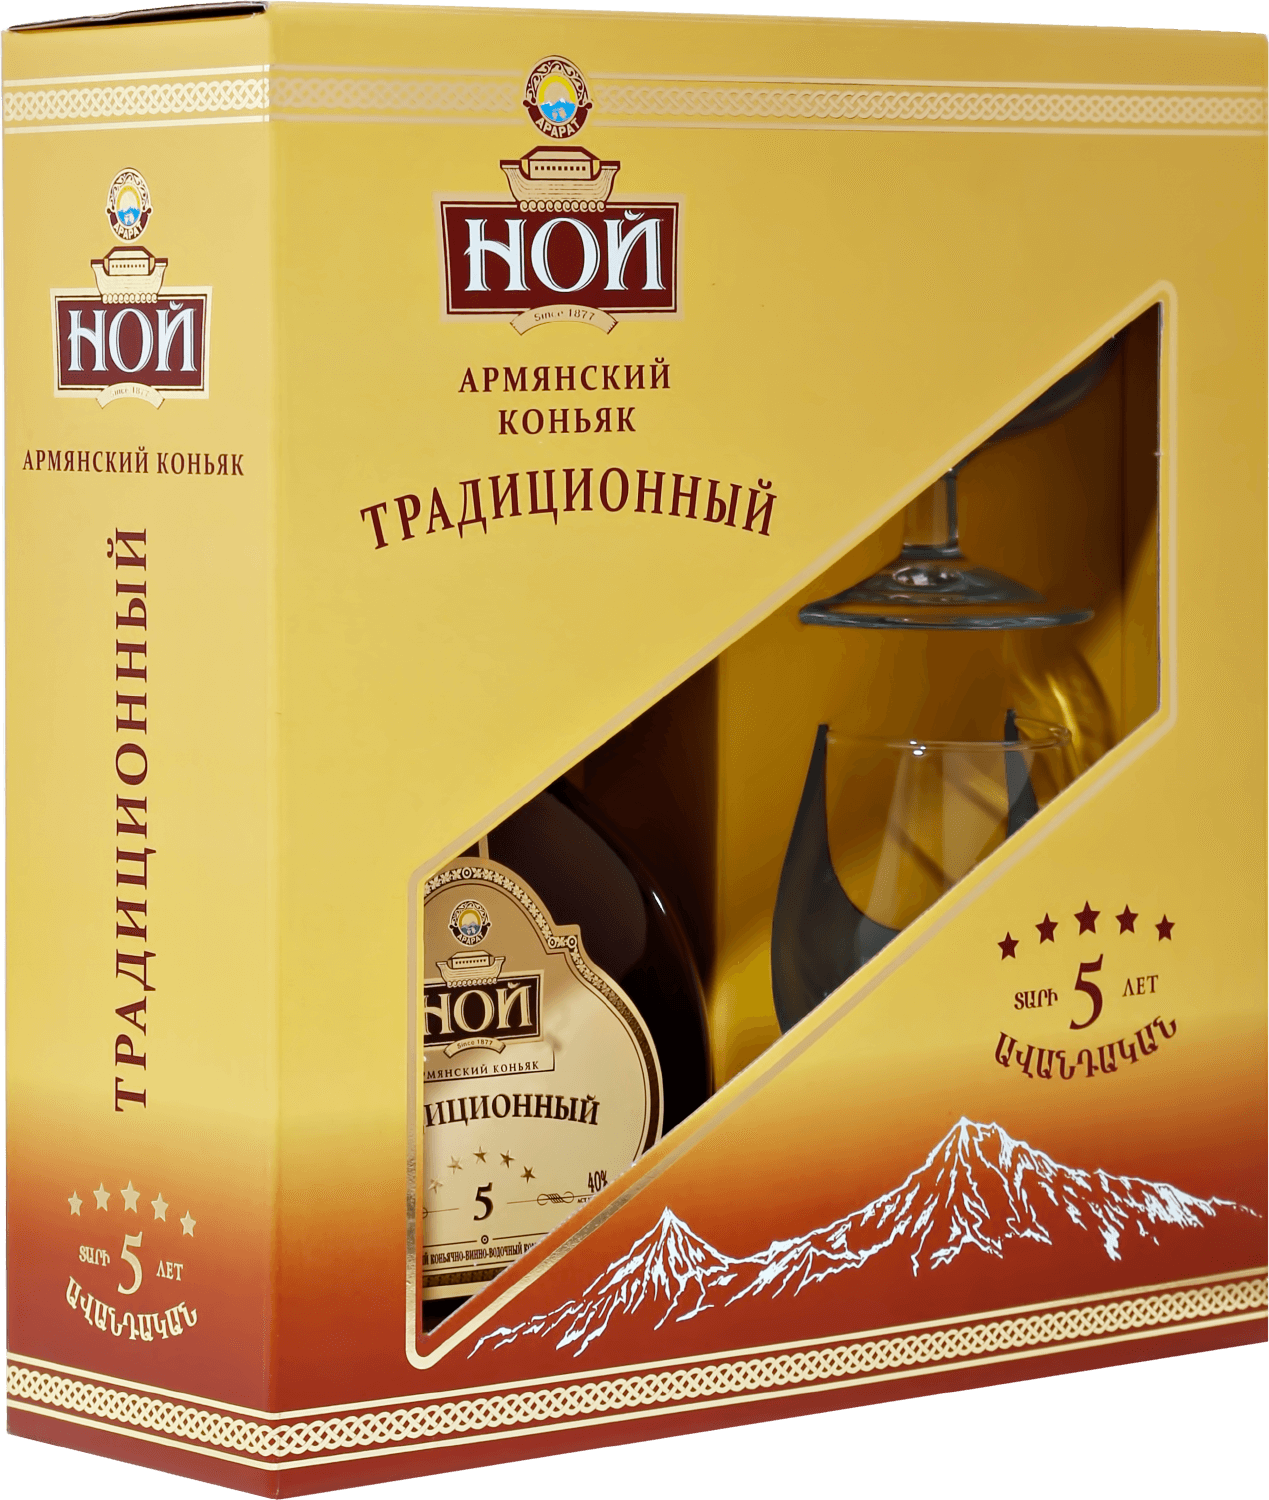 Noy Tradicionniy Armenian Brandy 5 y.o. in gift box with two glasses courvoisier vs in gift box with two glasses